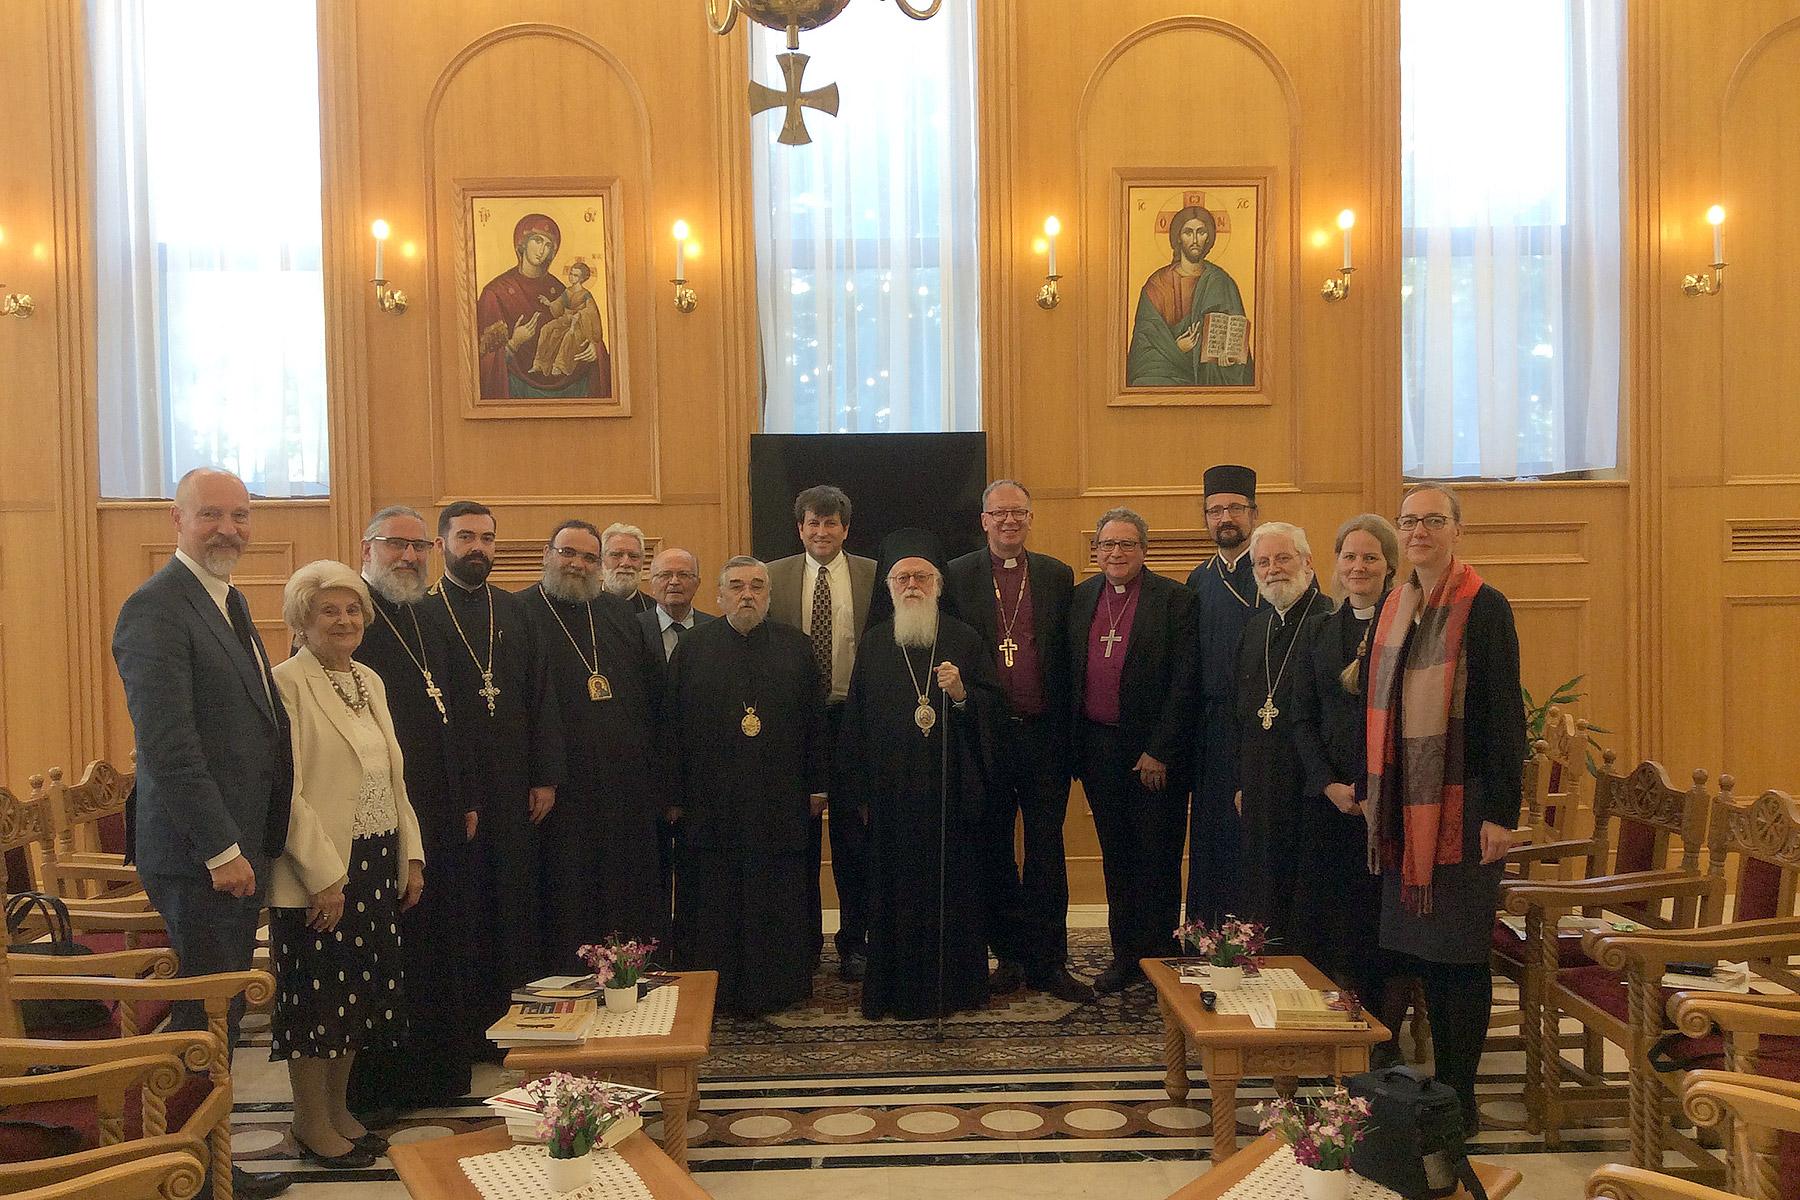 The Preparatory Committee for the 18th Plenary Session of the International Joint Commission on the Theological Dialogue between the LWF and the Orthodox Church, the meeting was held in Tirana, Albania. Photo: Archimandrite Agathangelos